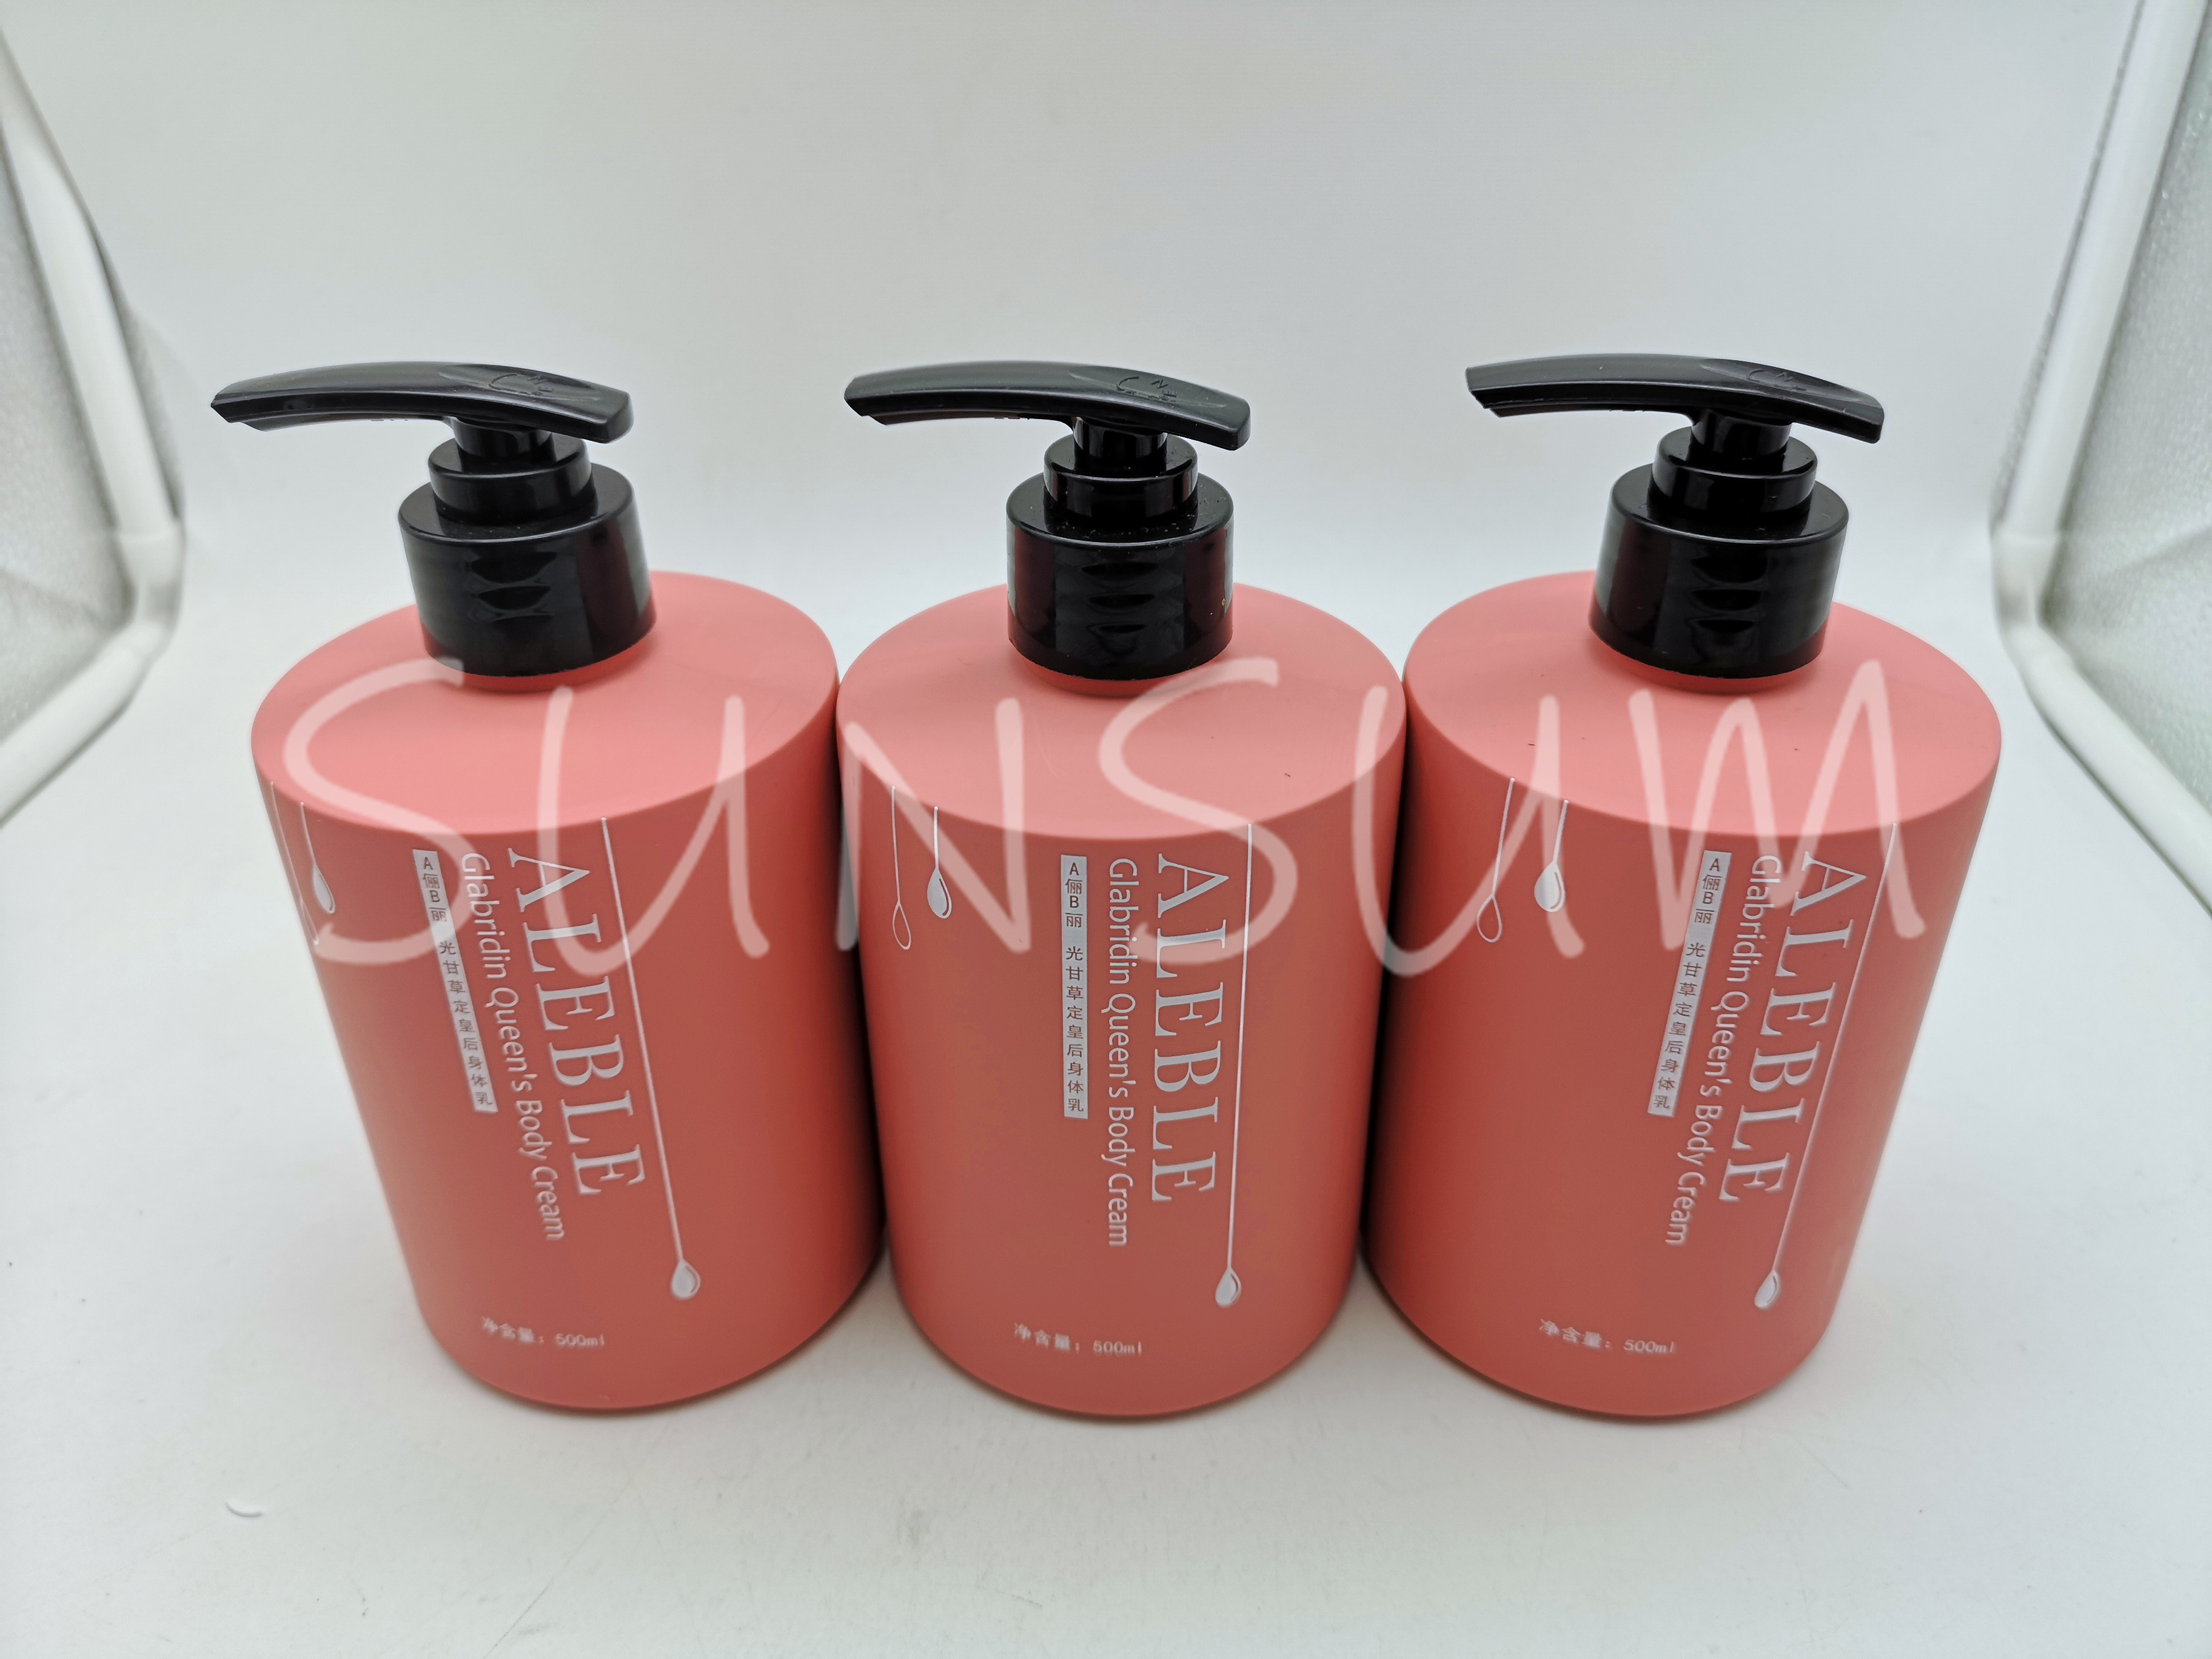 Sunsum high quality colored 500ml body lotion